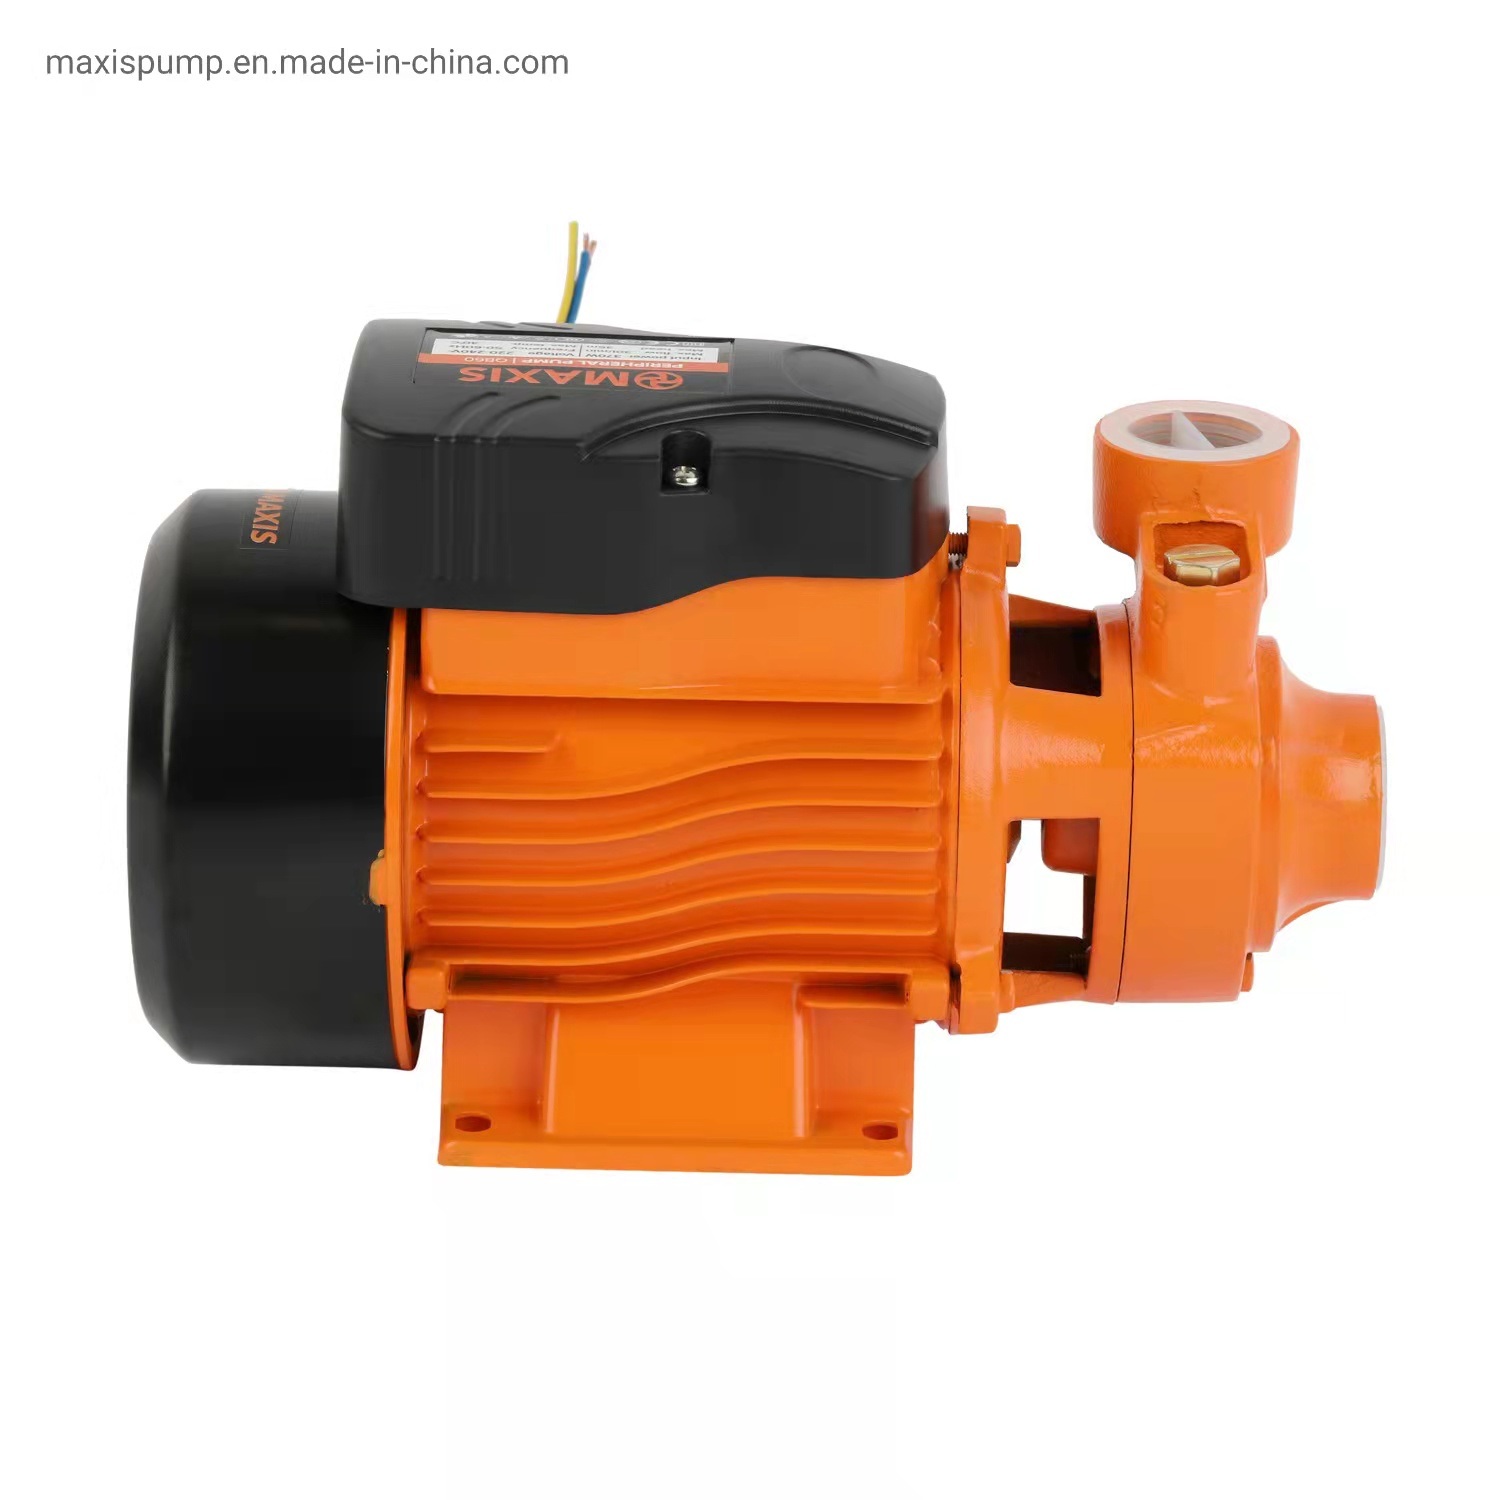 High Pressure Wholesale Bomba Surface Peripheral Electric Water Pump